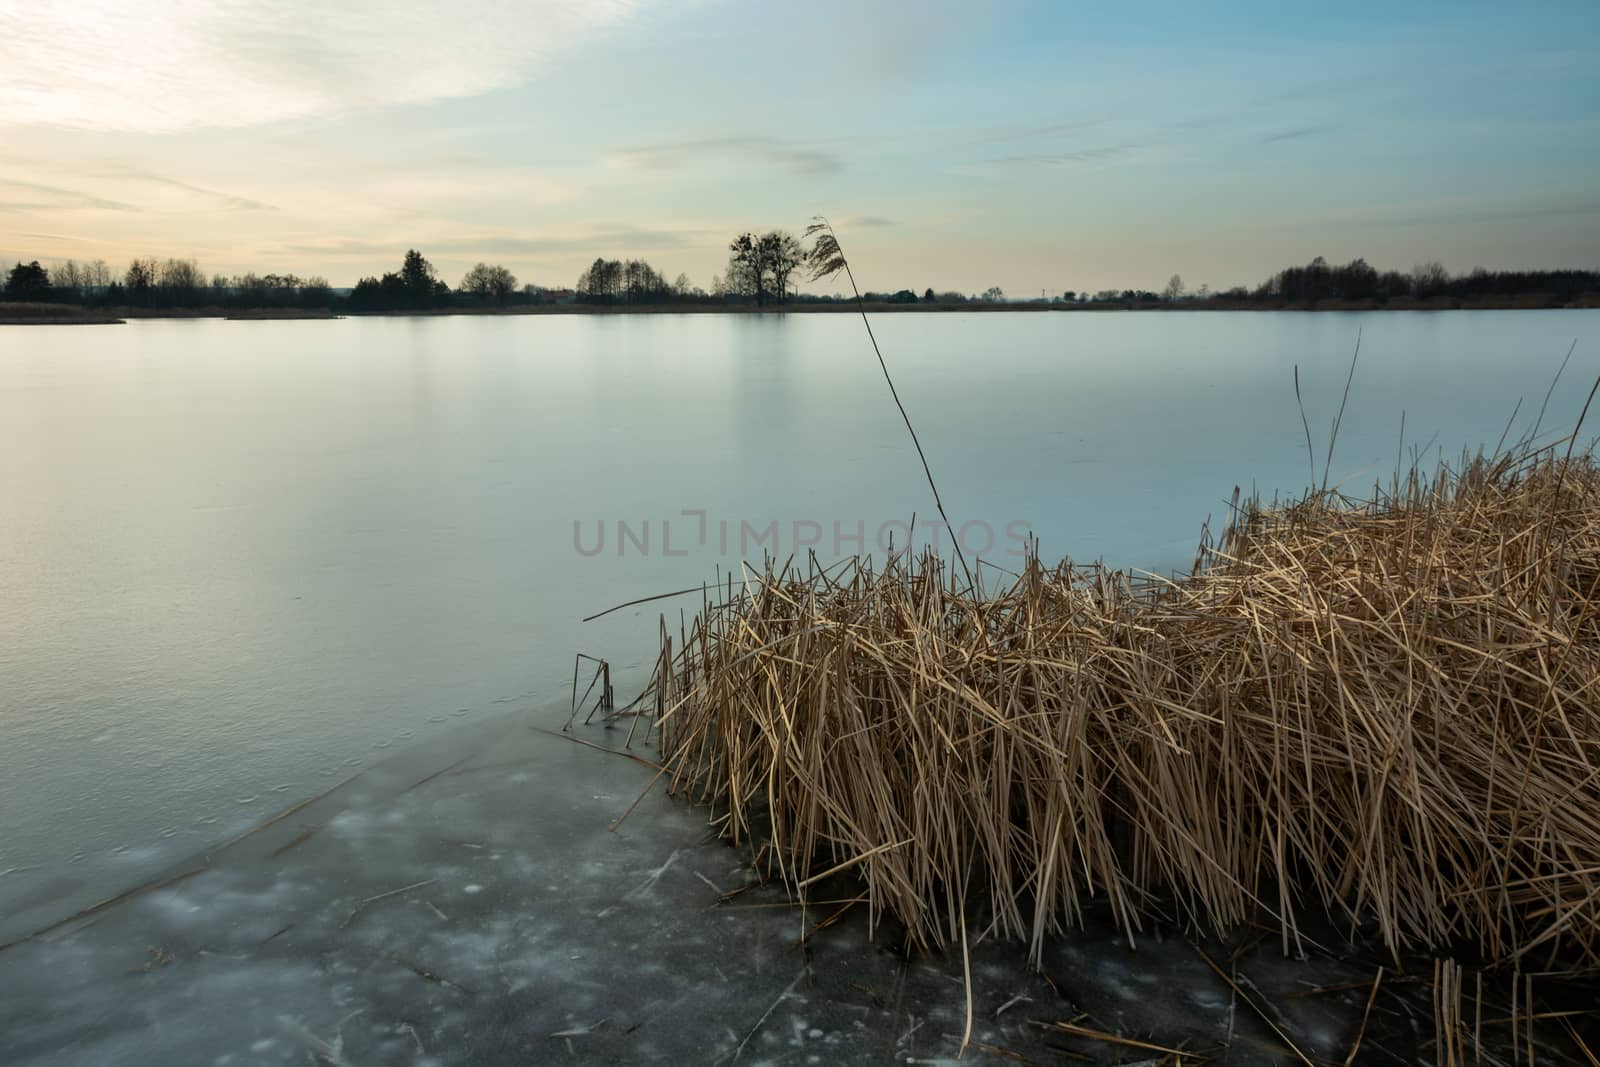 Dry reeds in a frozen lake, evening winter view